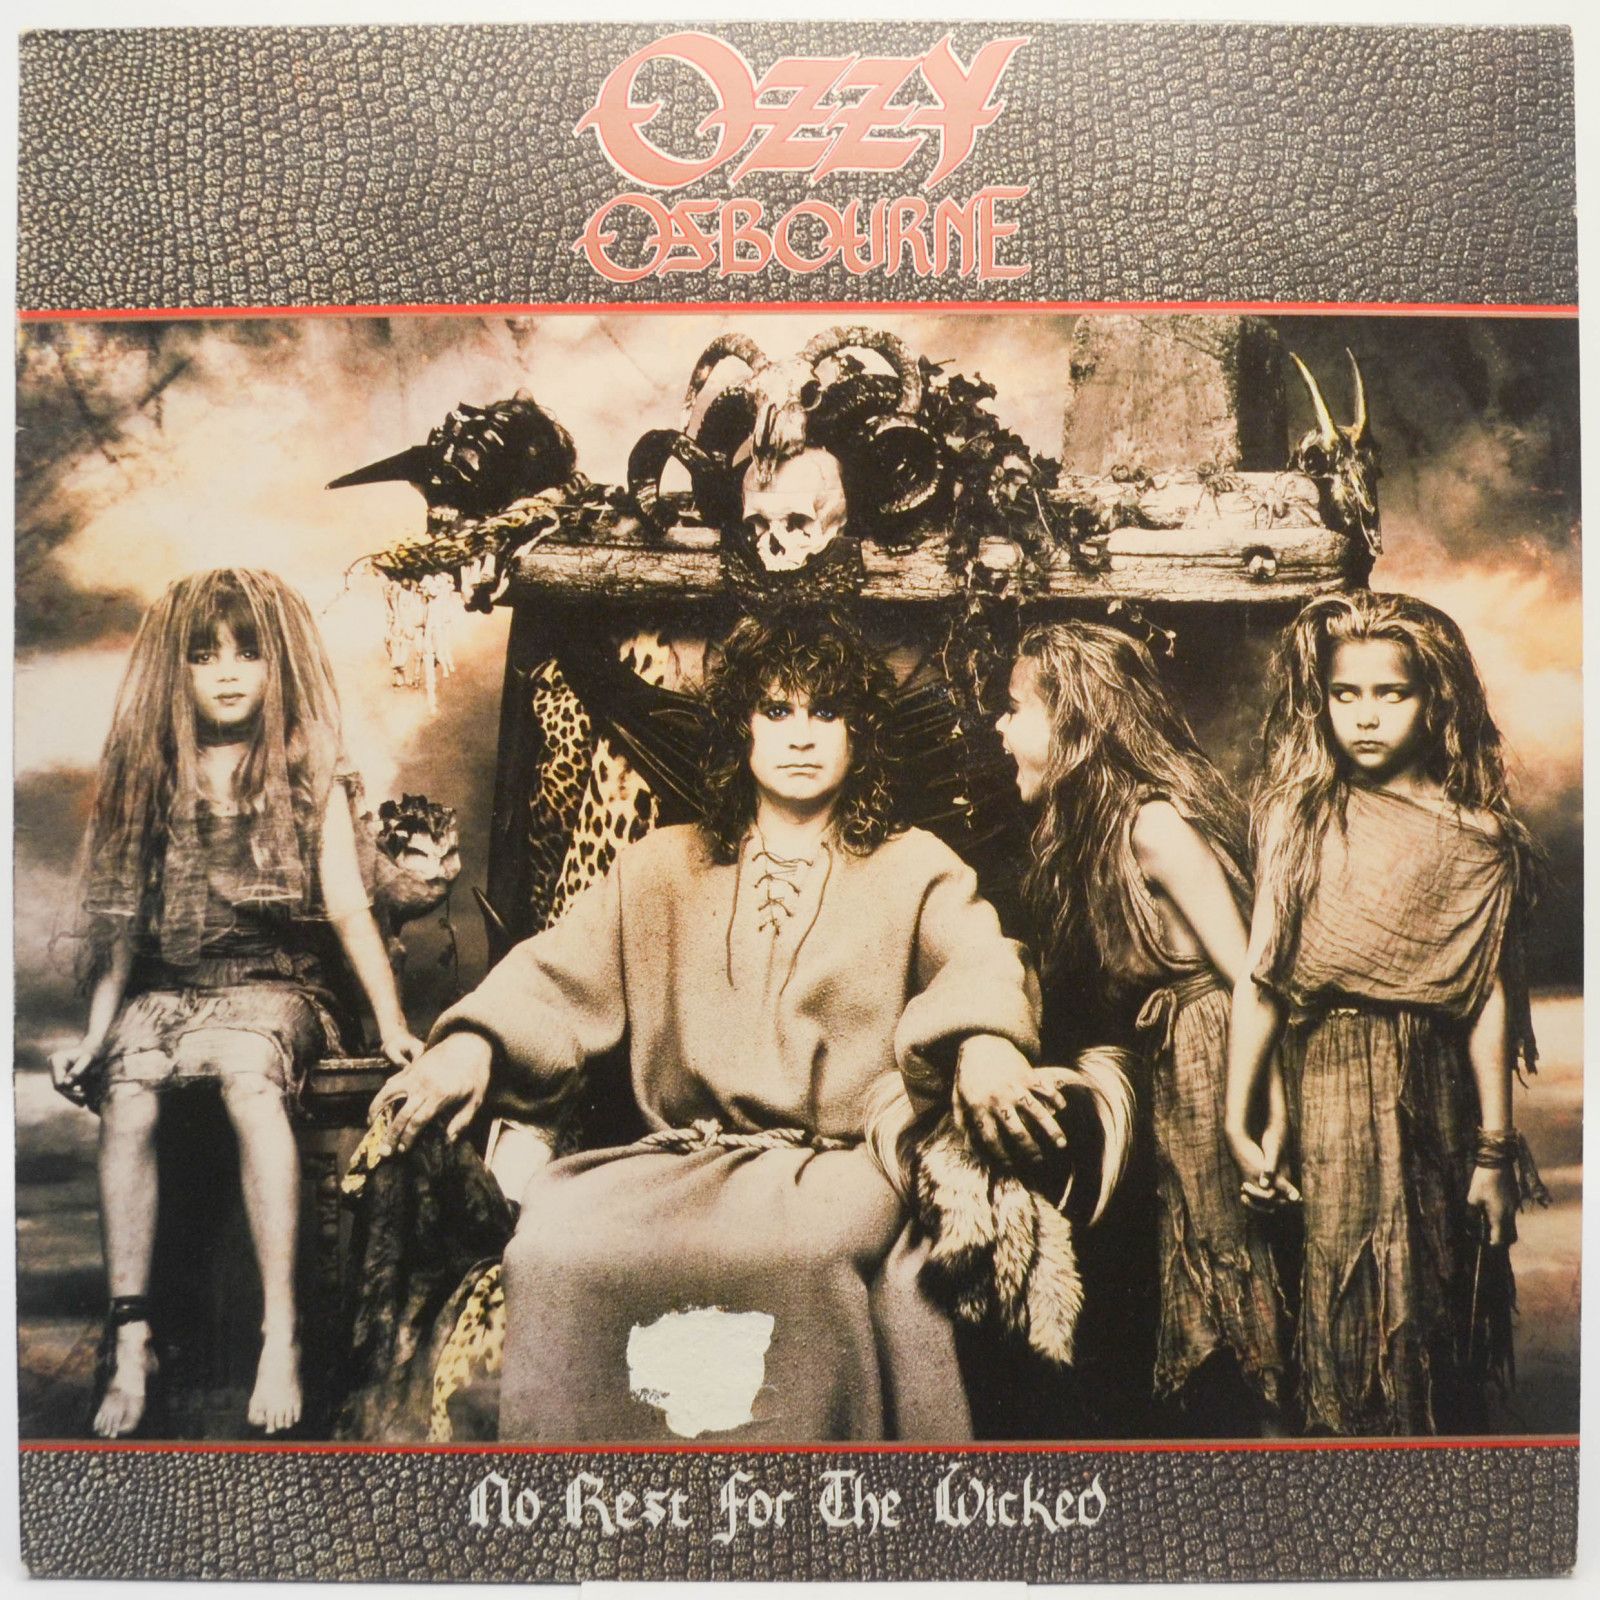 Ozzy Osbourne — No Rest For The Wicked, 1988